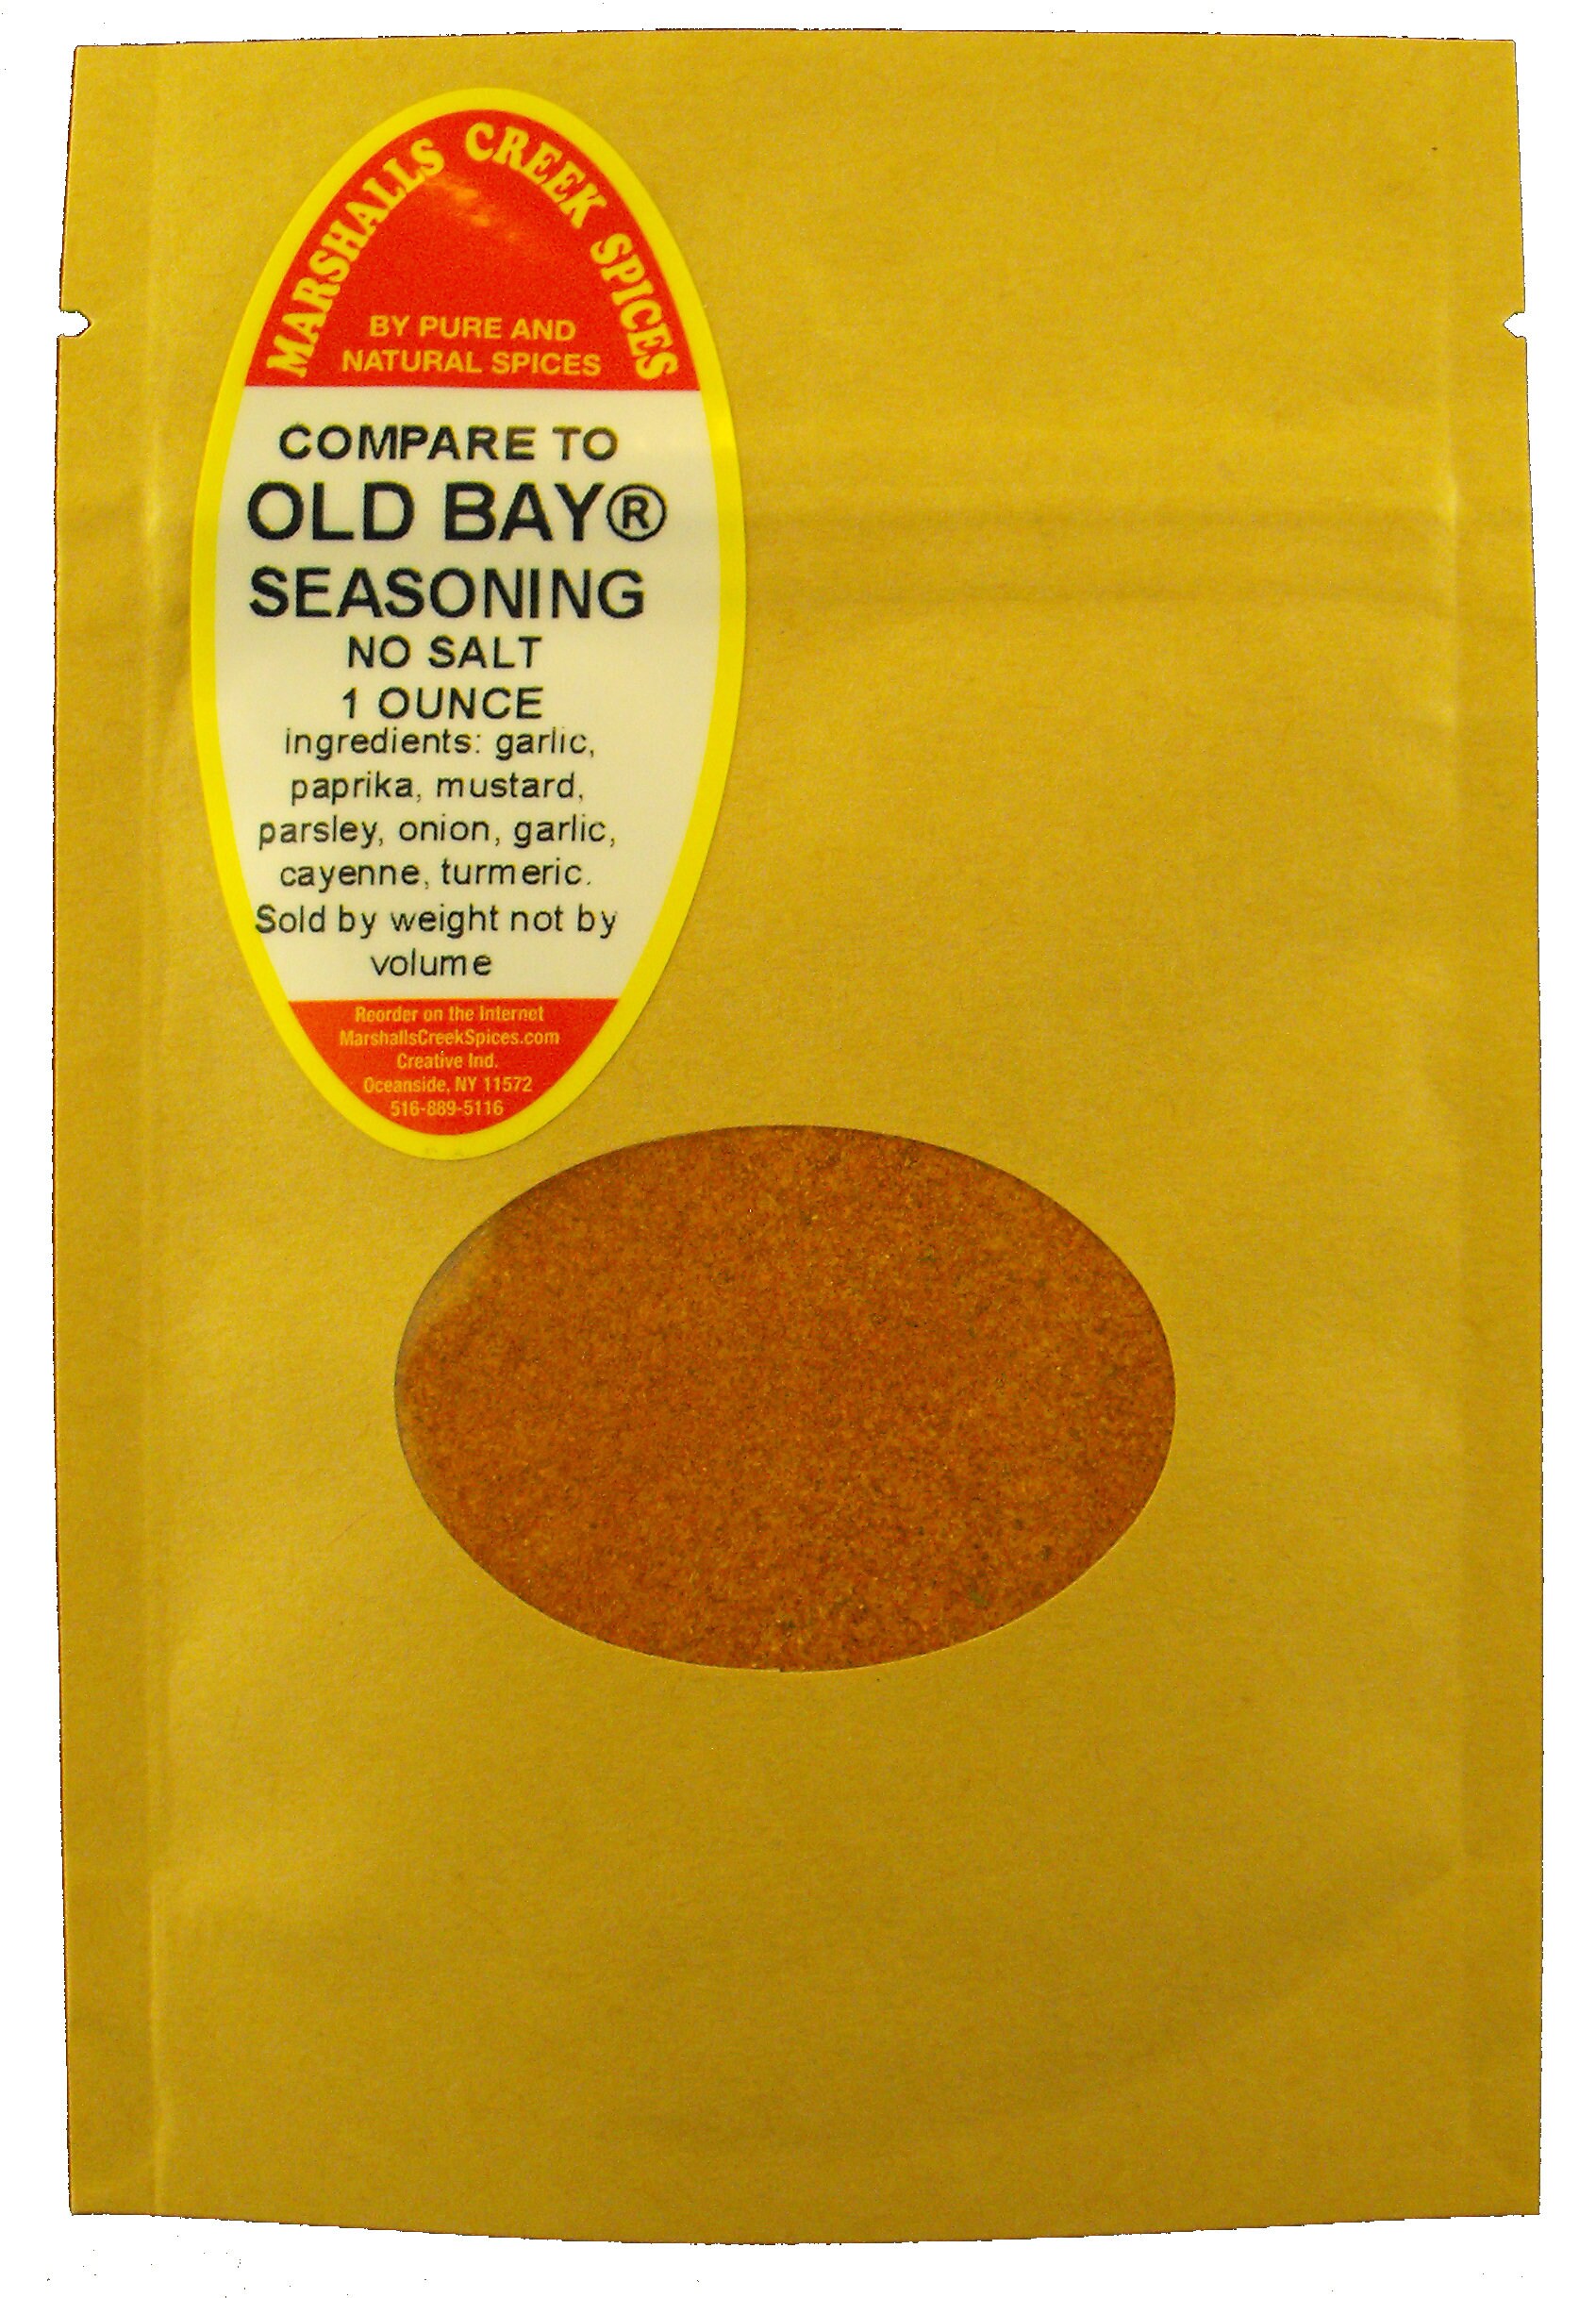 Sample Size, Ez Meal Prep, Maryland Style Seafood Seasoning, No Salt | Compare To Old Bay 3.49 + 1 Cent Shipping, Marshalls Creek Spices